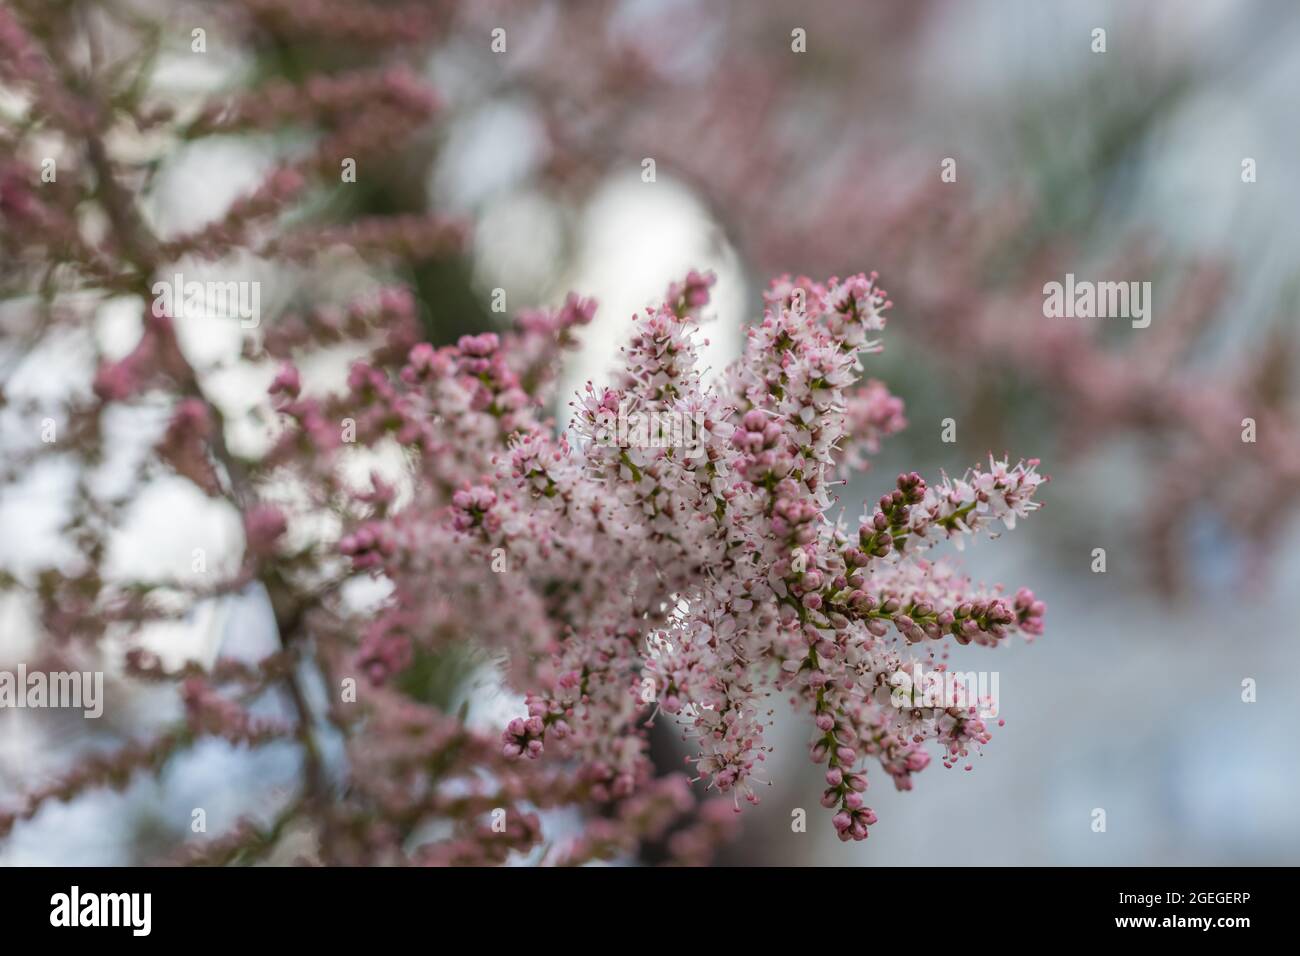 Blooming of Tamarisk or salt cedar green plant with pink flowers Stock Photo